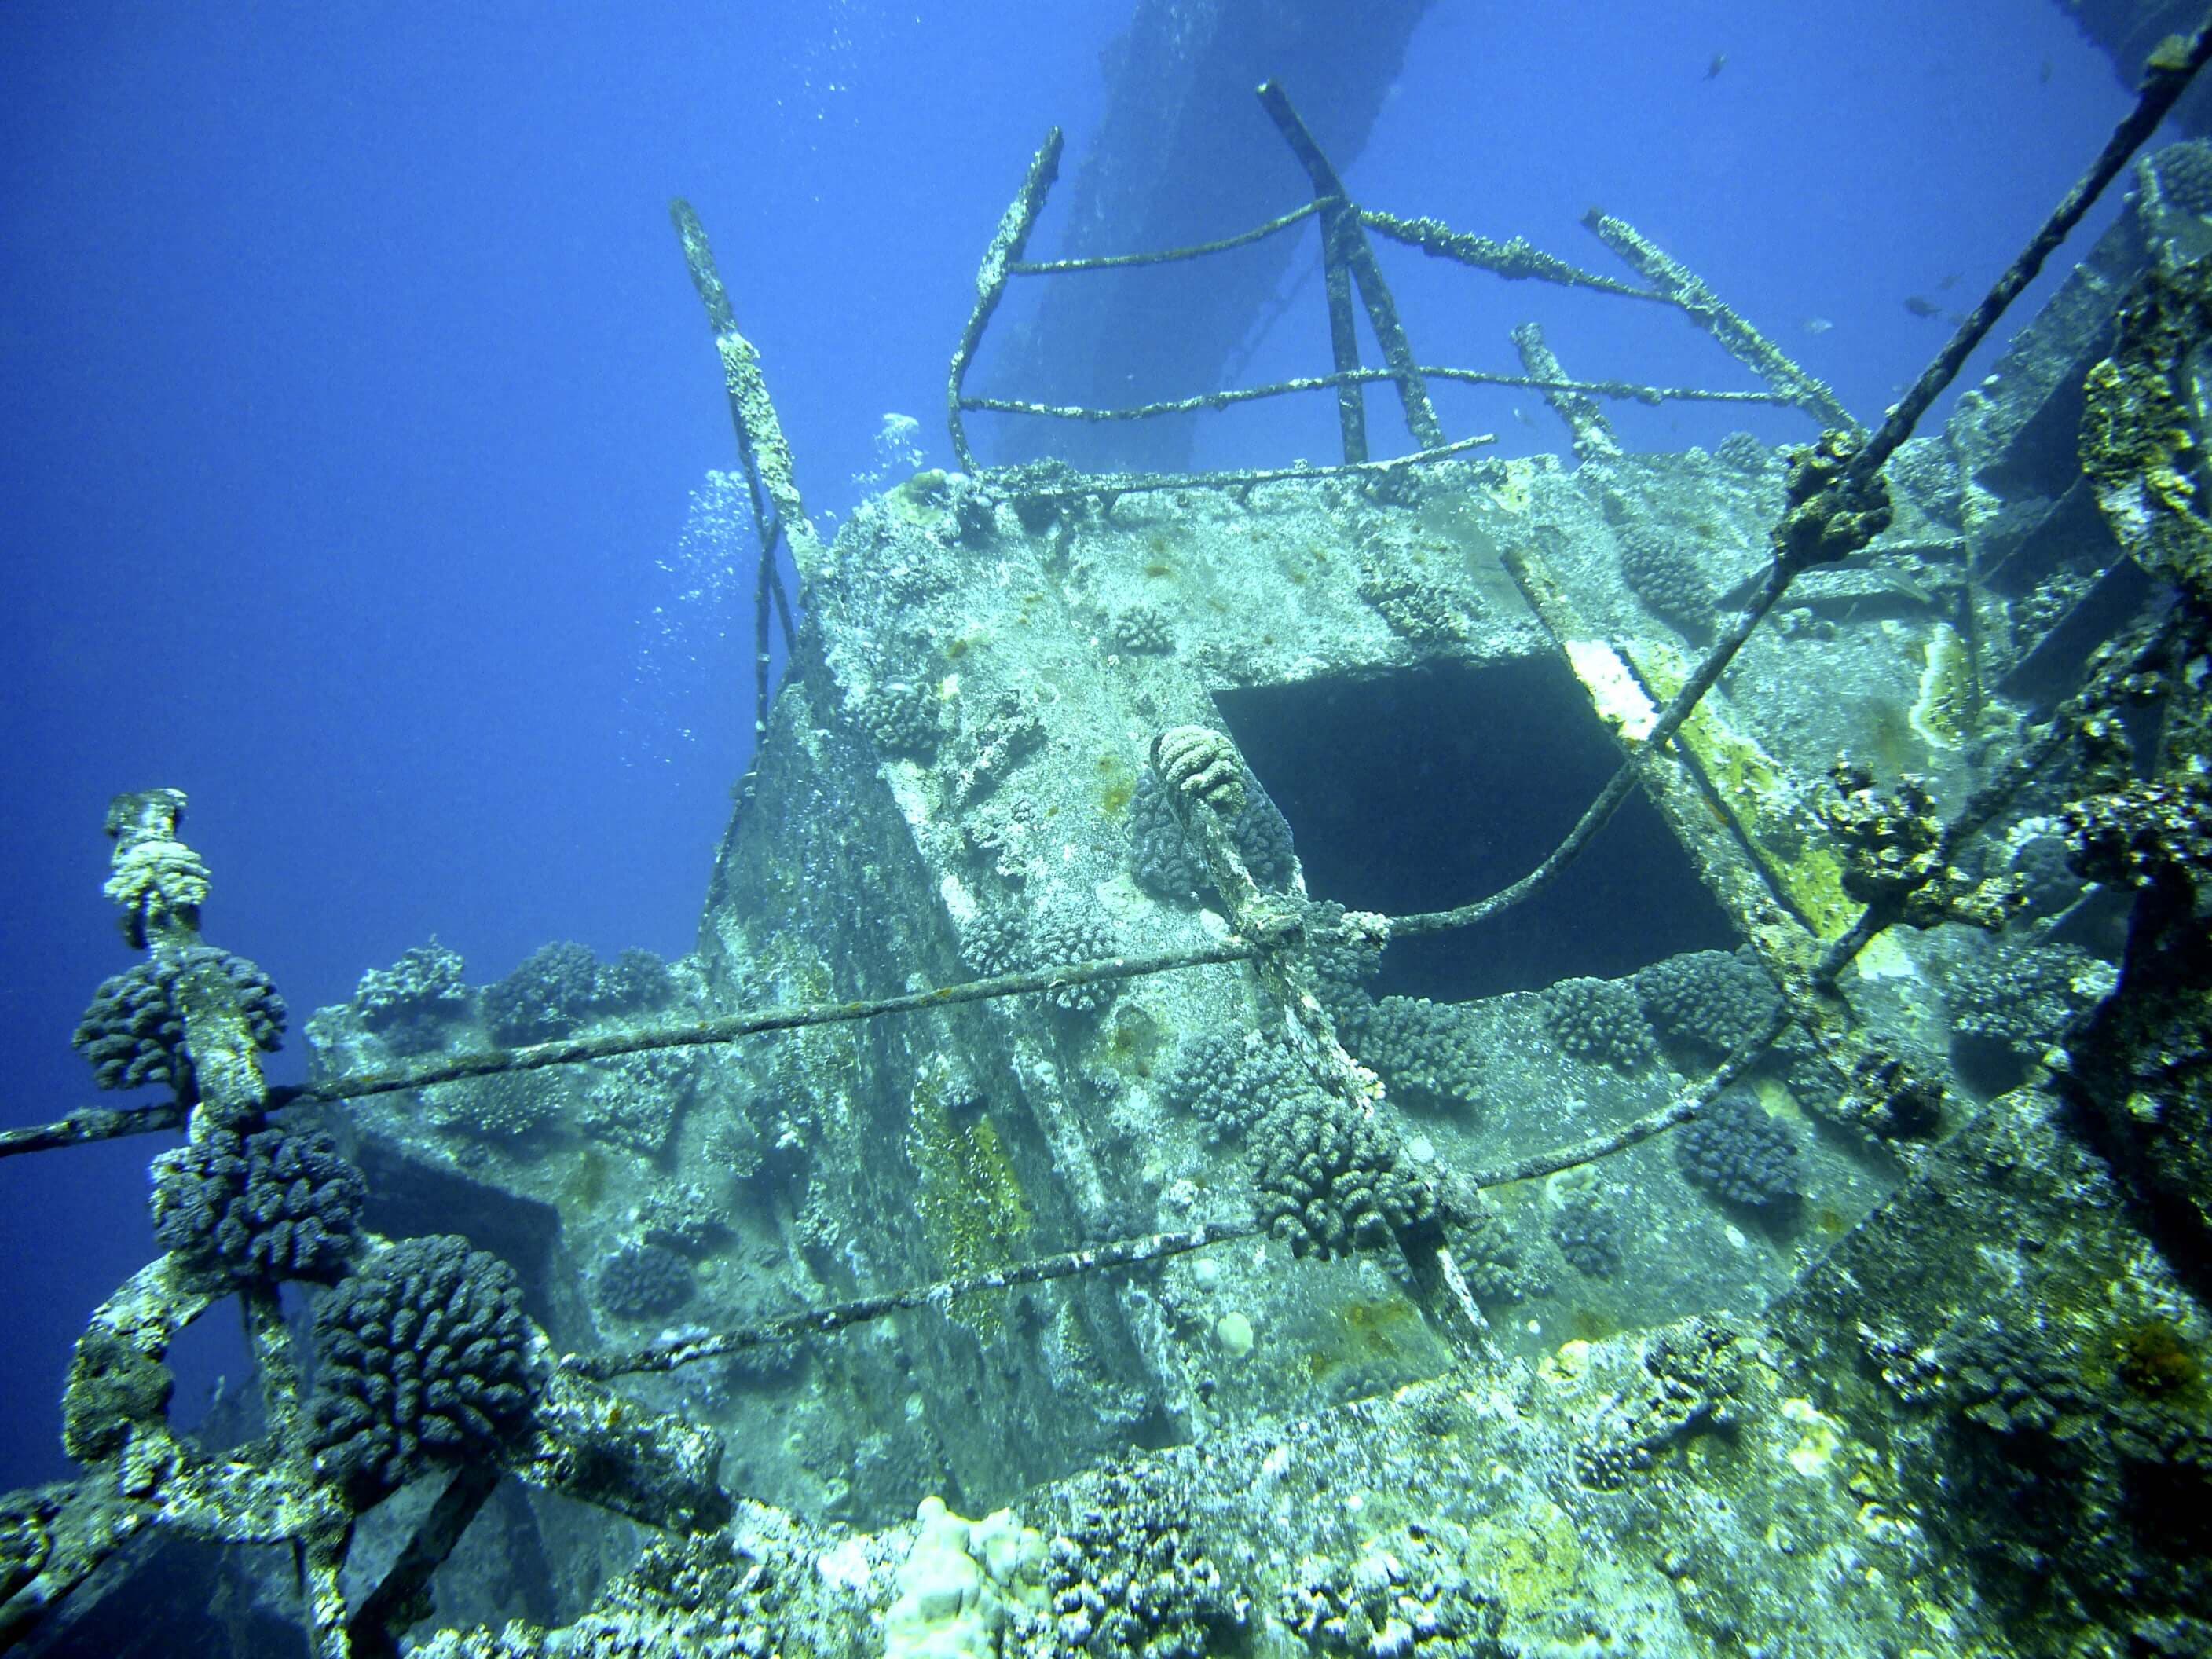 Copper Wreck is the only available wreck dive in Yala diving tours in Sri Lanka